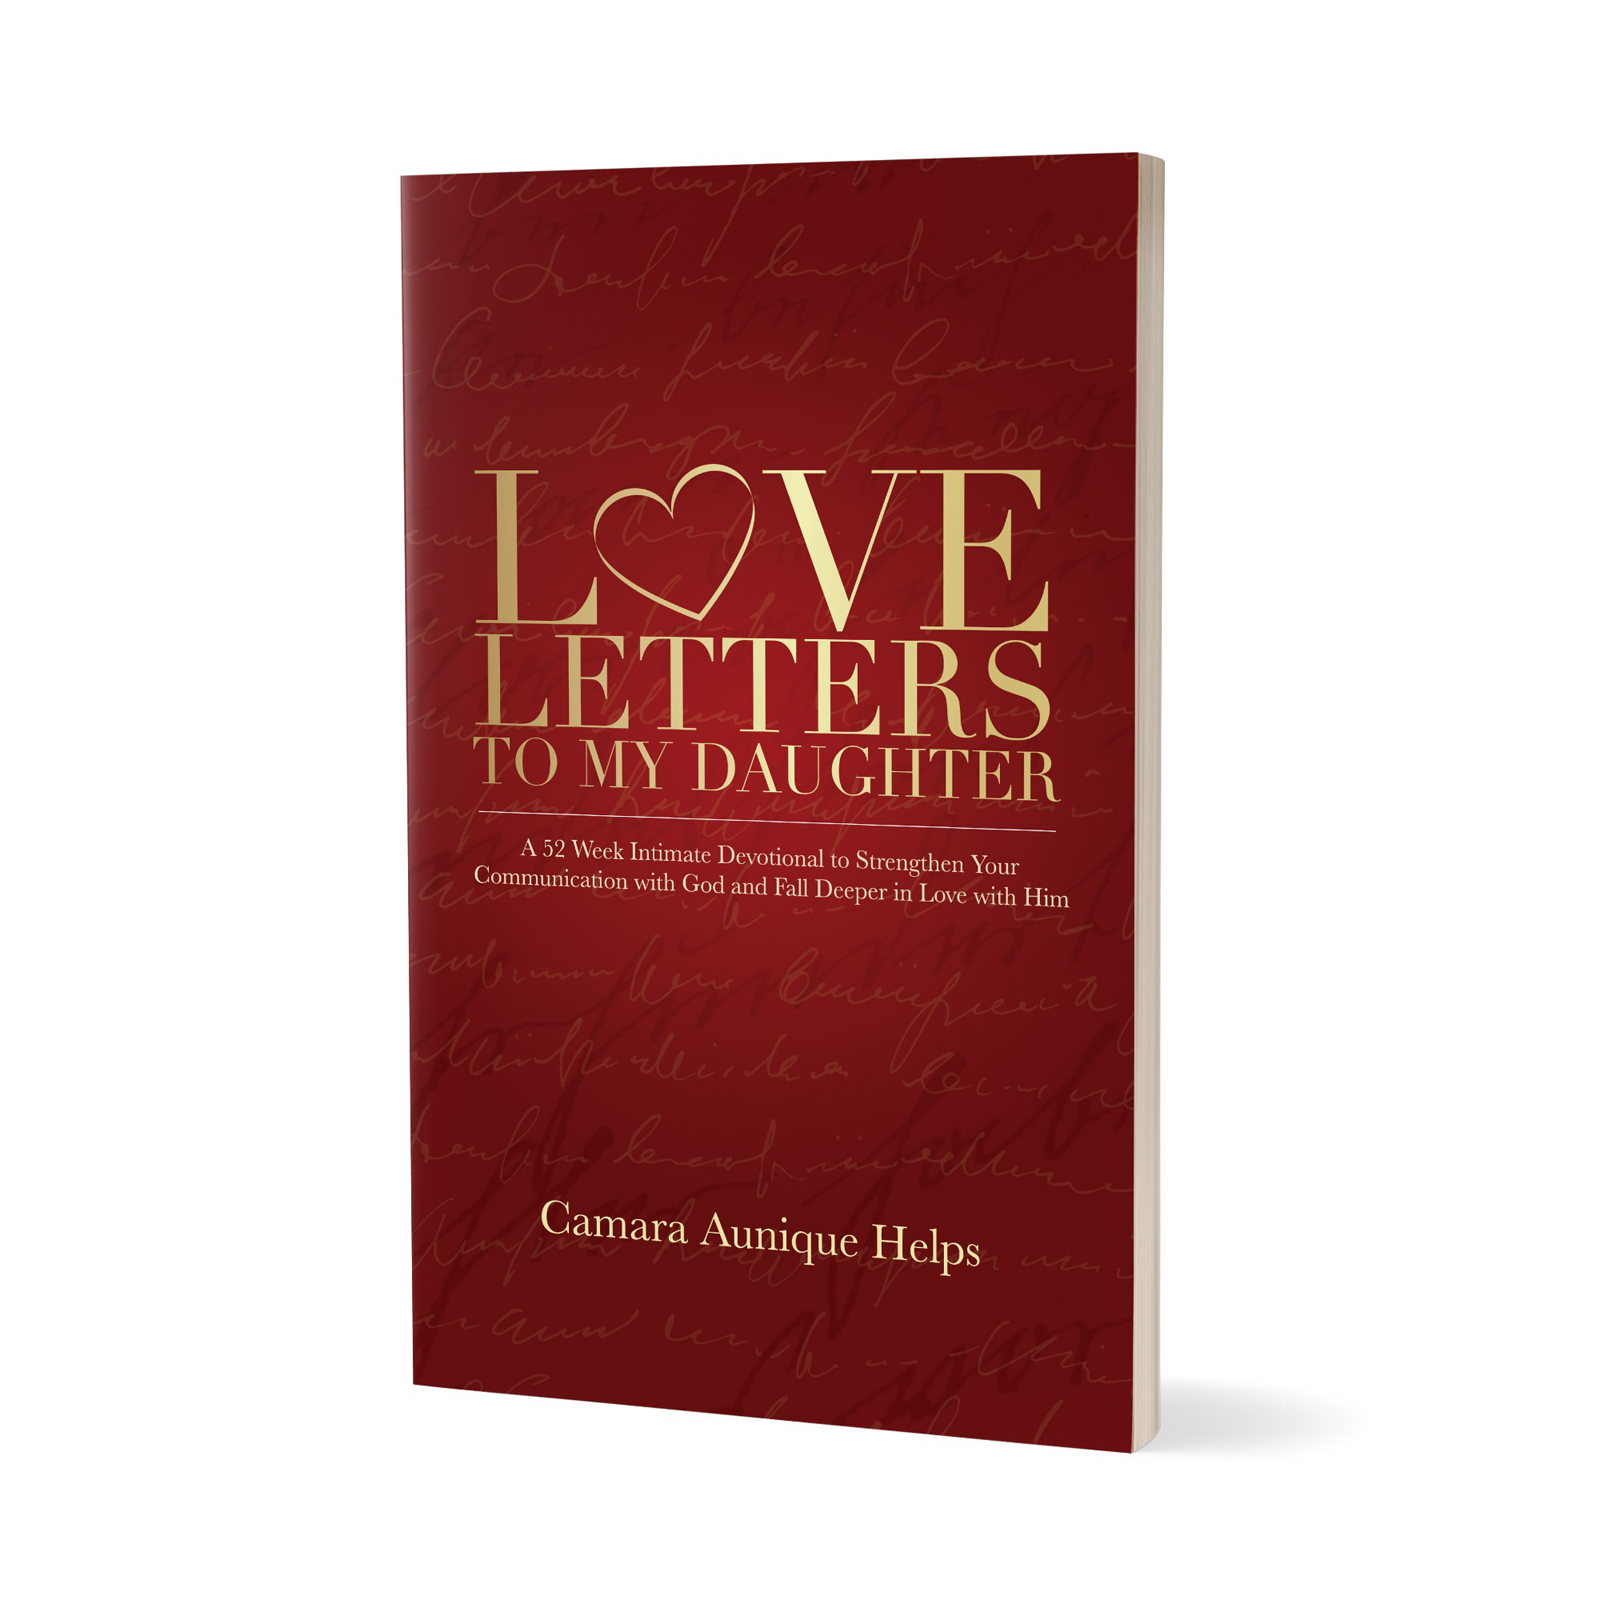 PRE ORDER- Love Letters To My Daughter by Camara Aunique